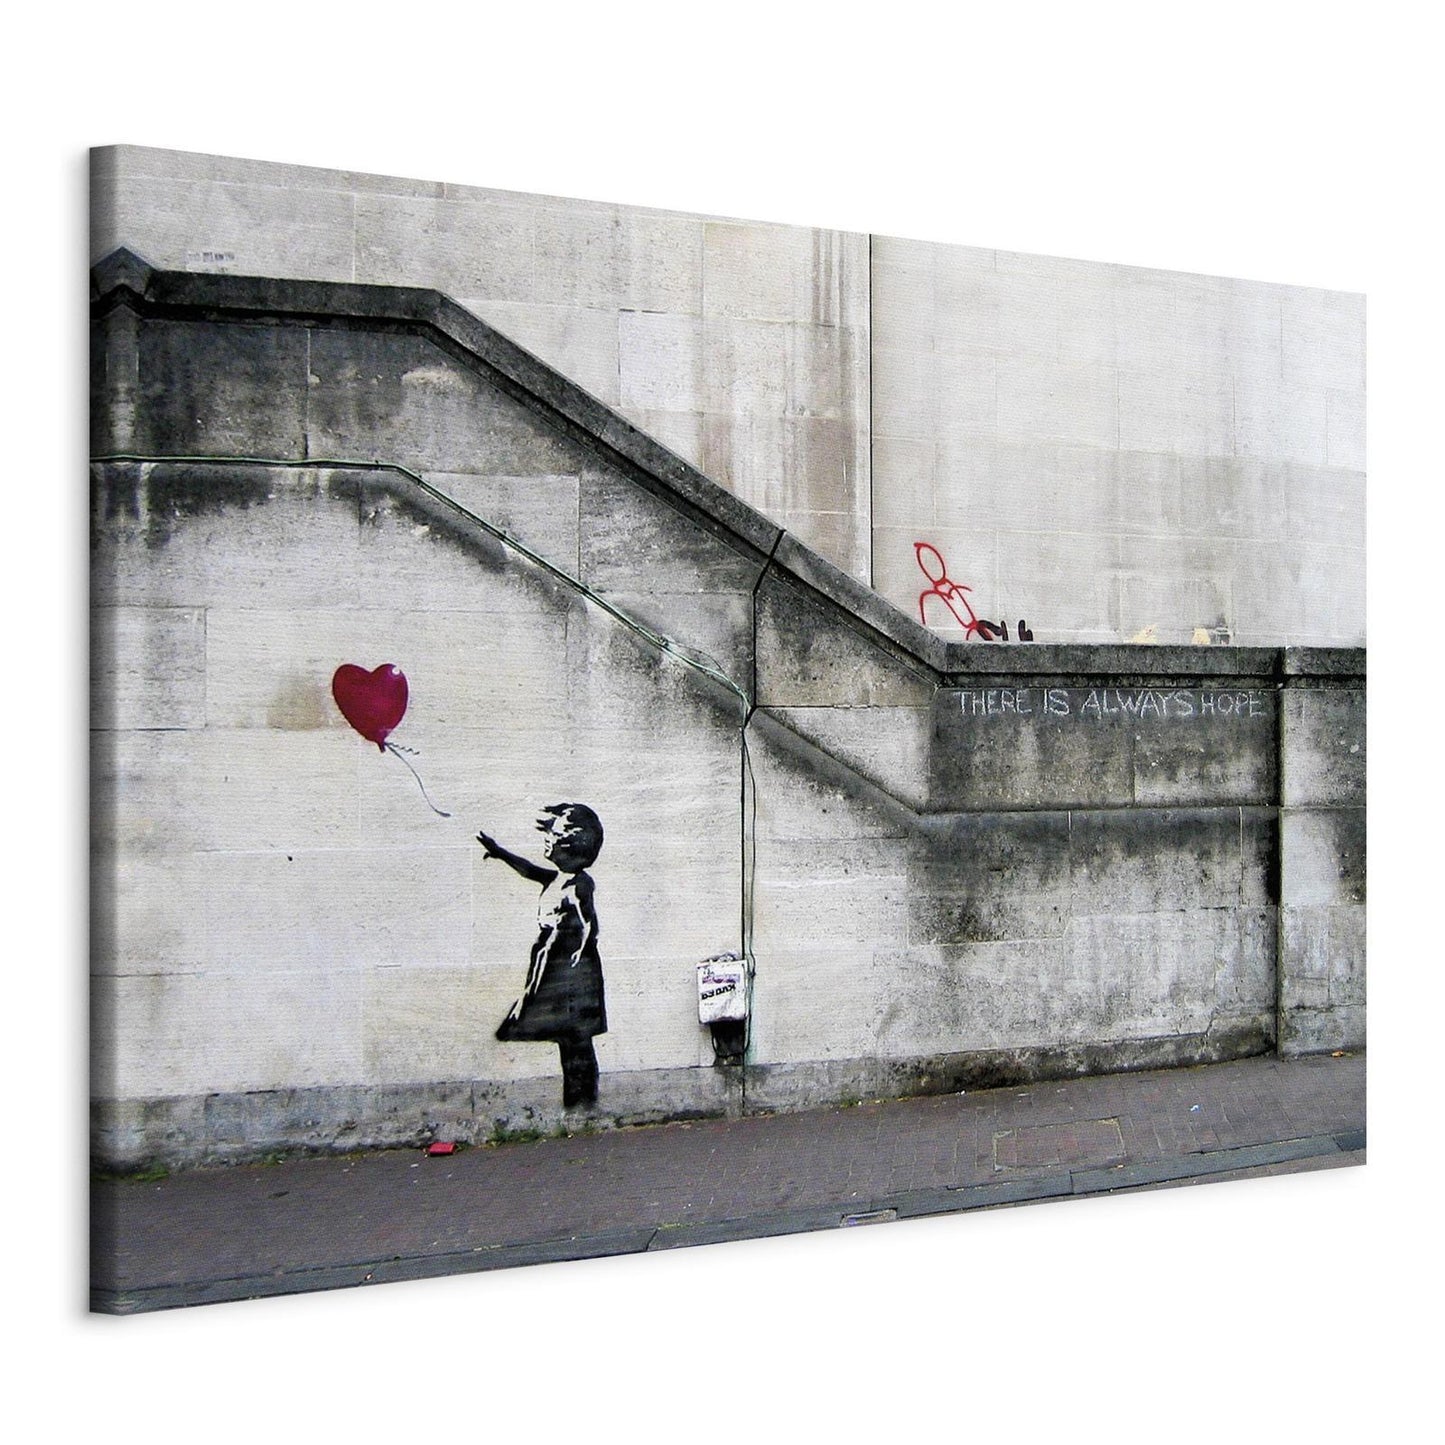 Painting - There is always hope (Banksy)